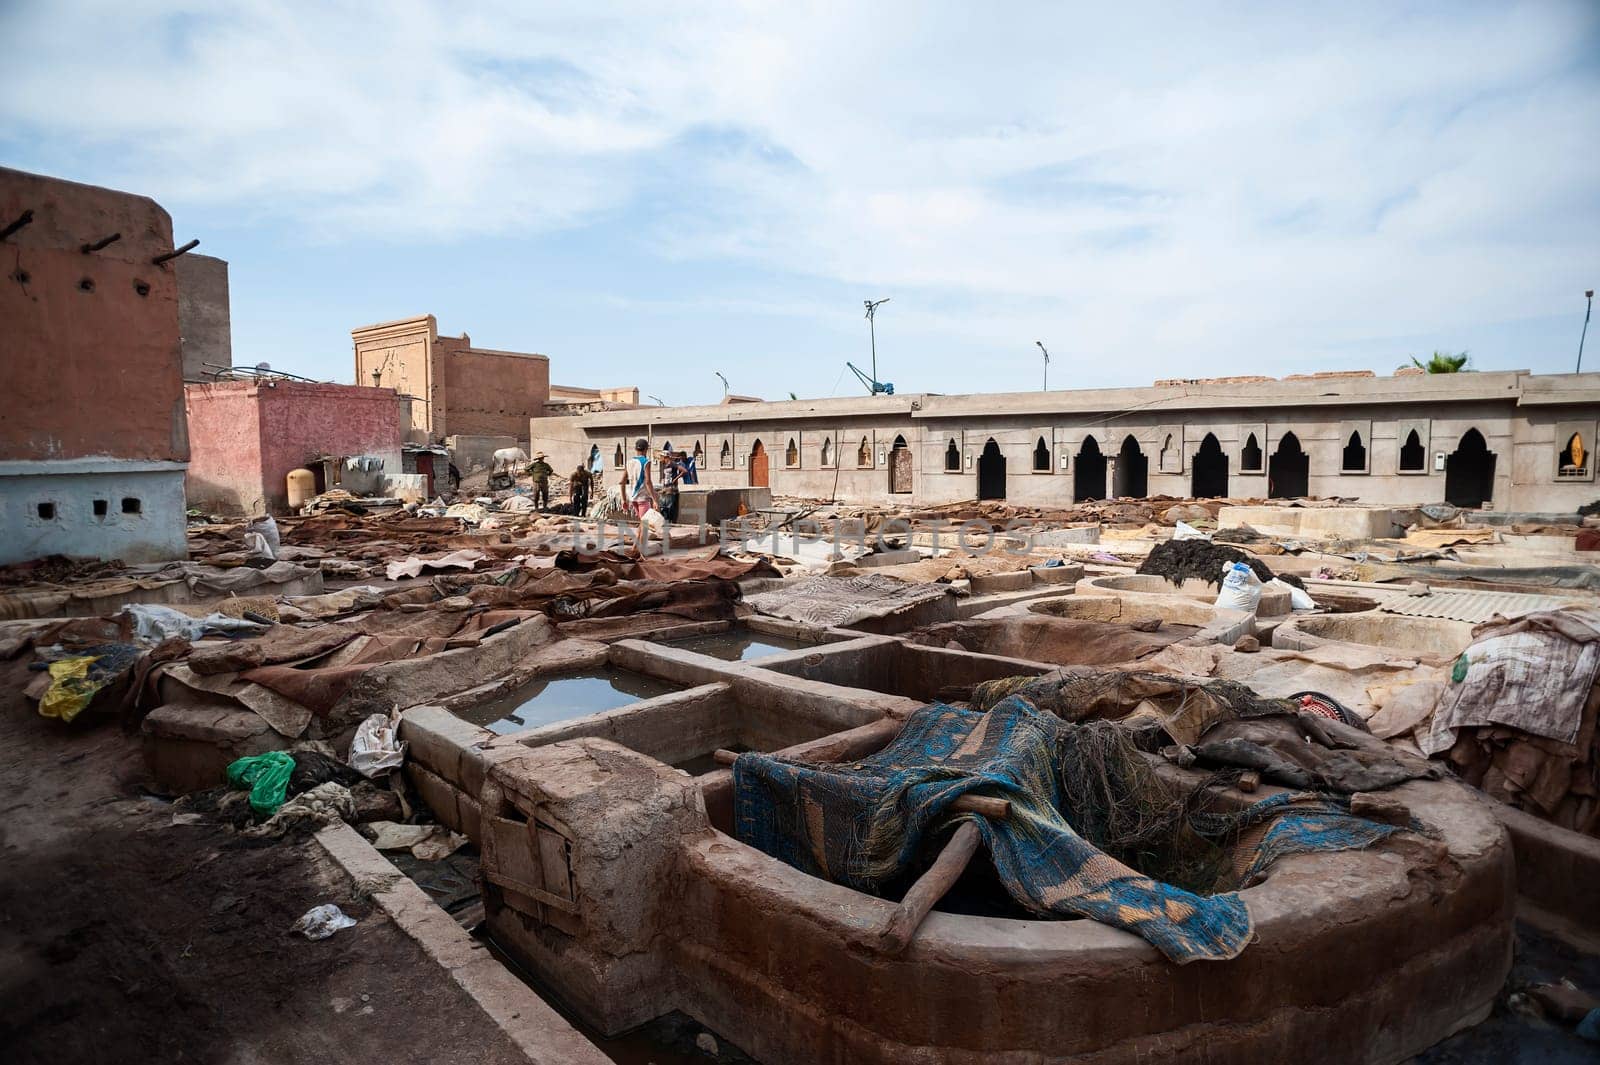 Tannery in Marrakesh, Morocco by Giamplume